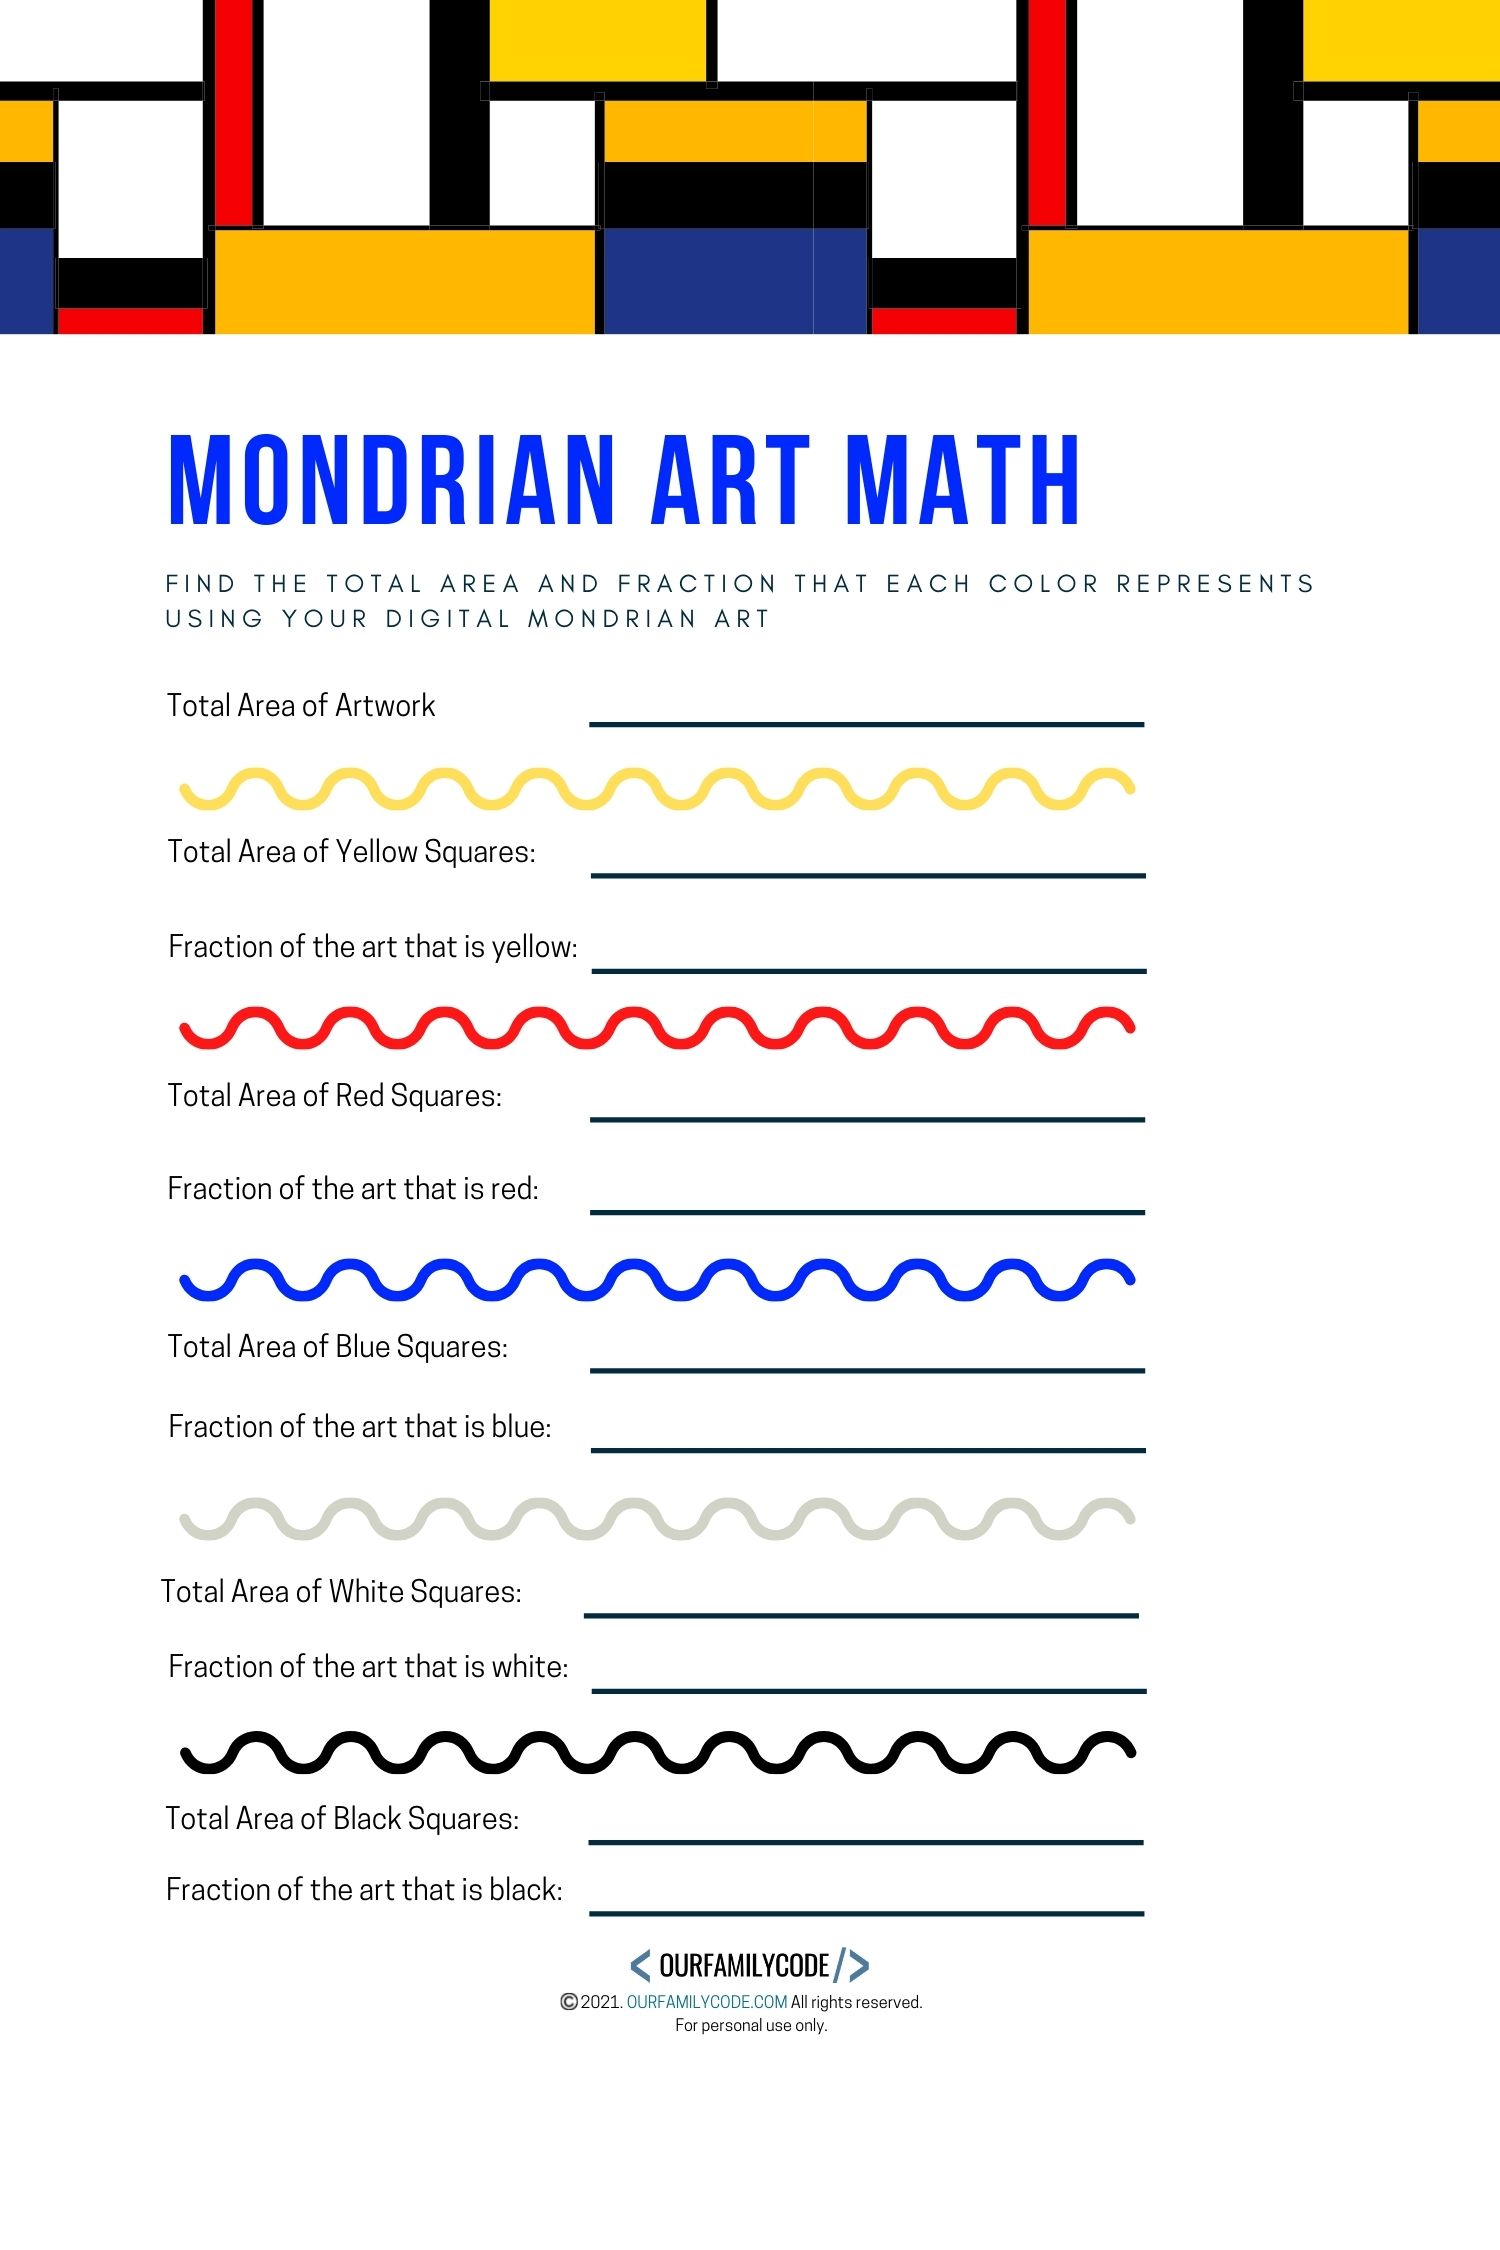 A Mondrian art math worksheet to find area and fraction of Mondrian artwork.